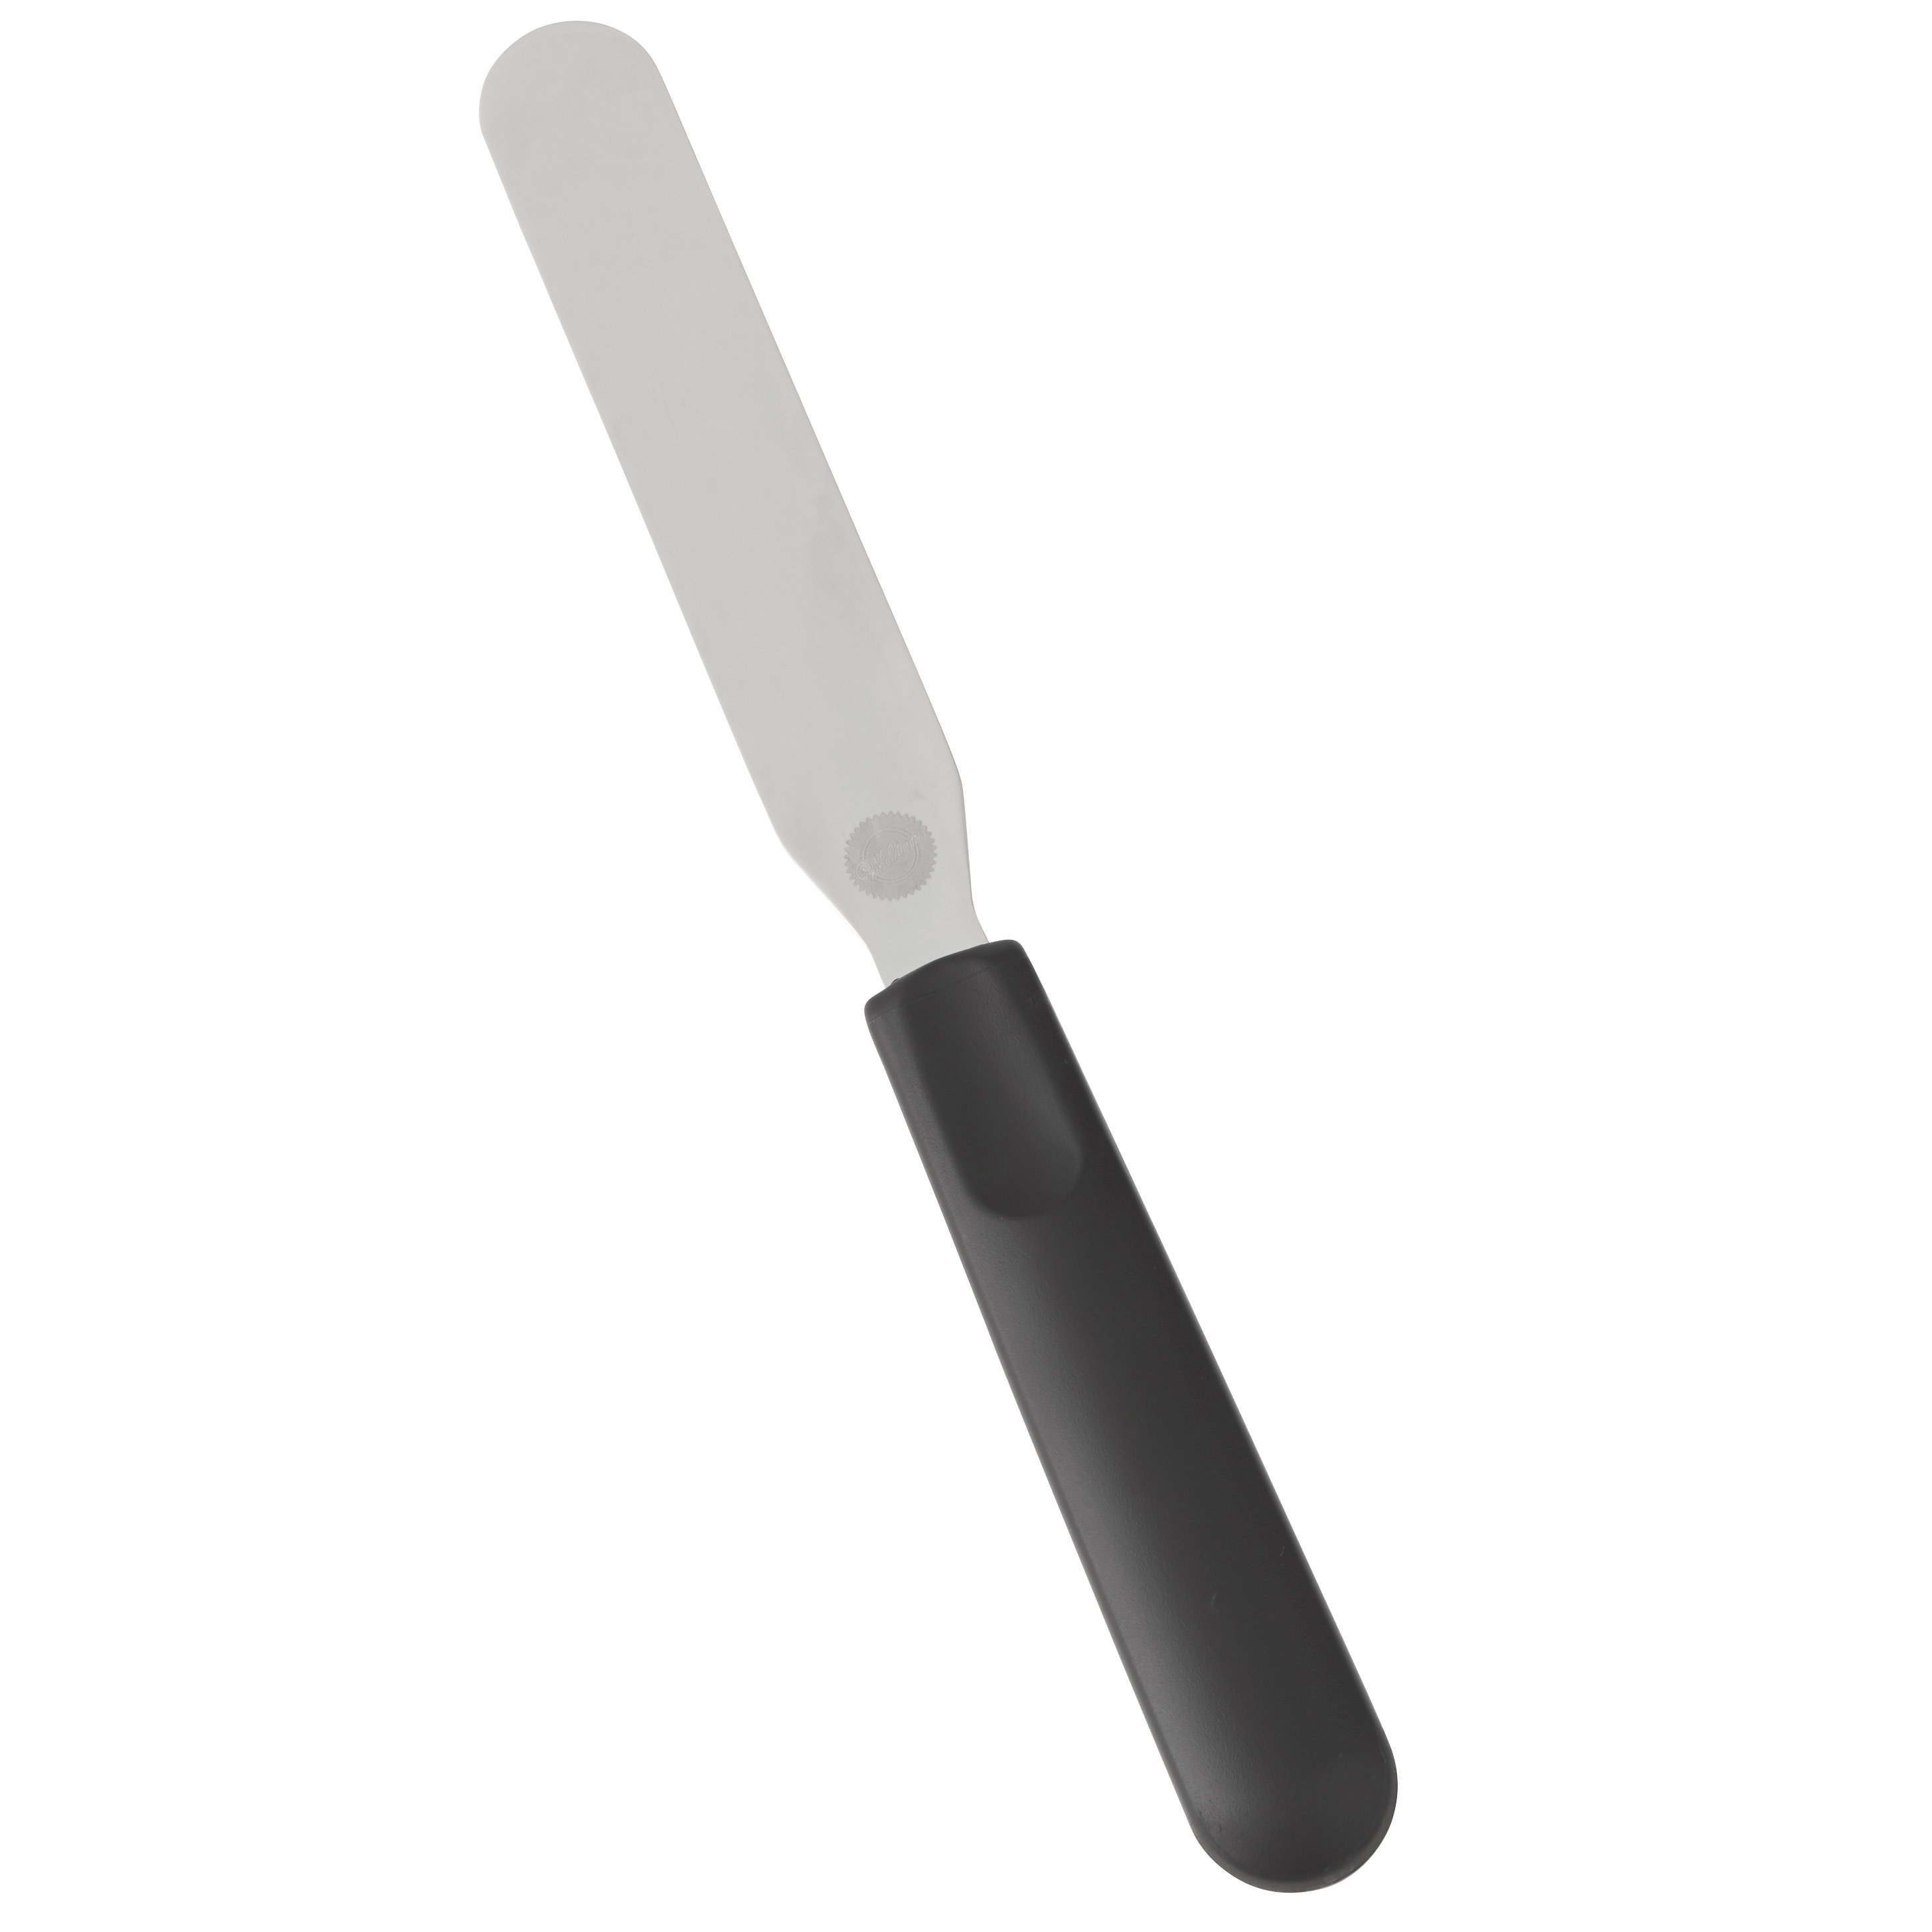 Wilton Straight Spatula, Stainless Steel Blade, Plastic Handle, 11 inch - image 5 of 7